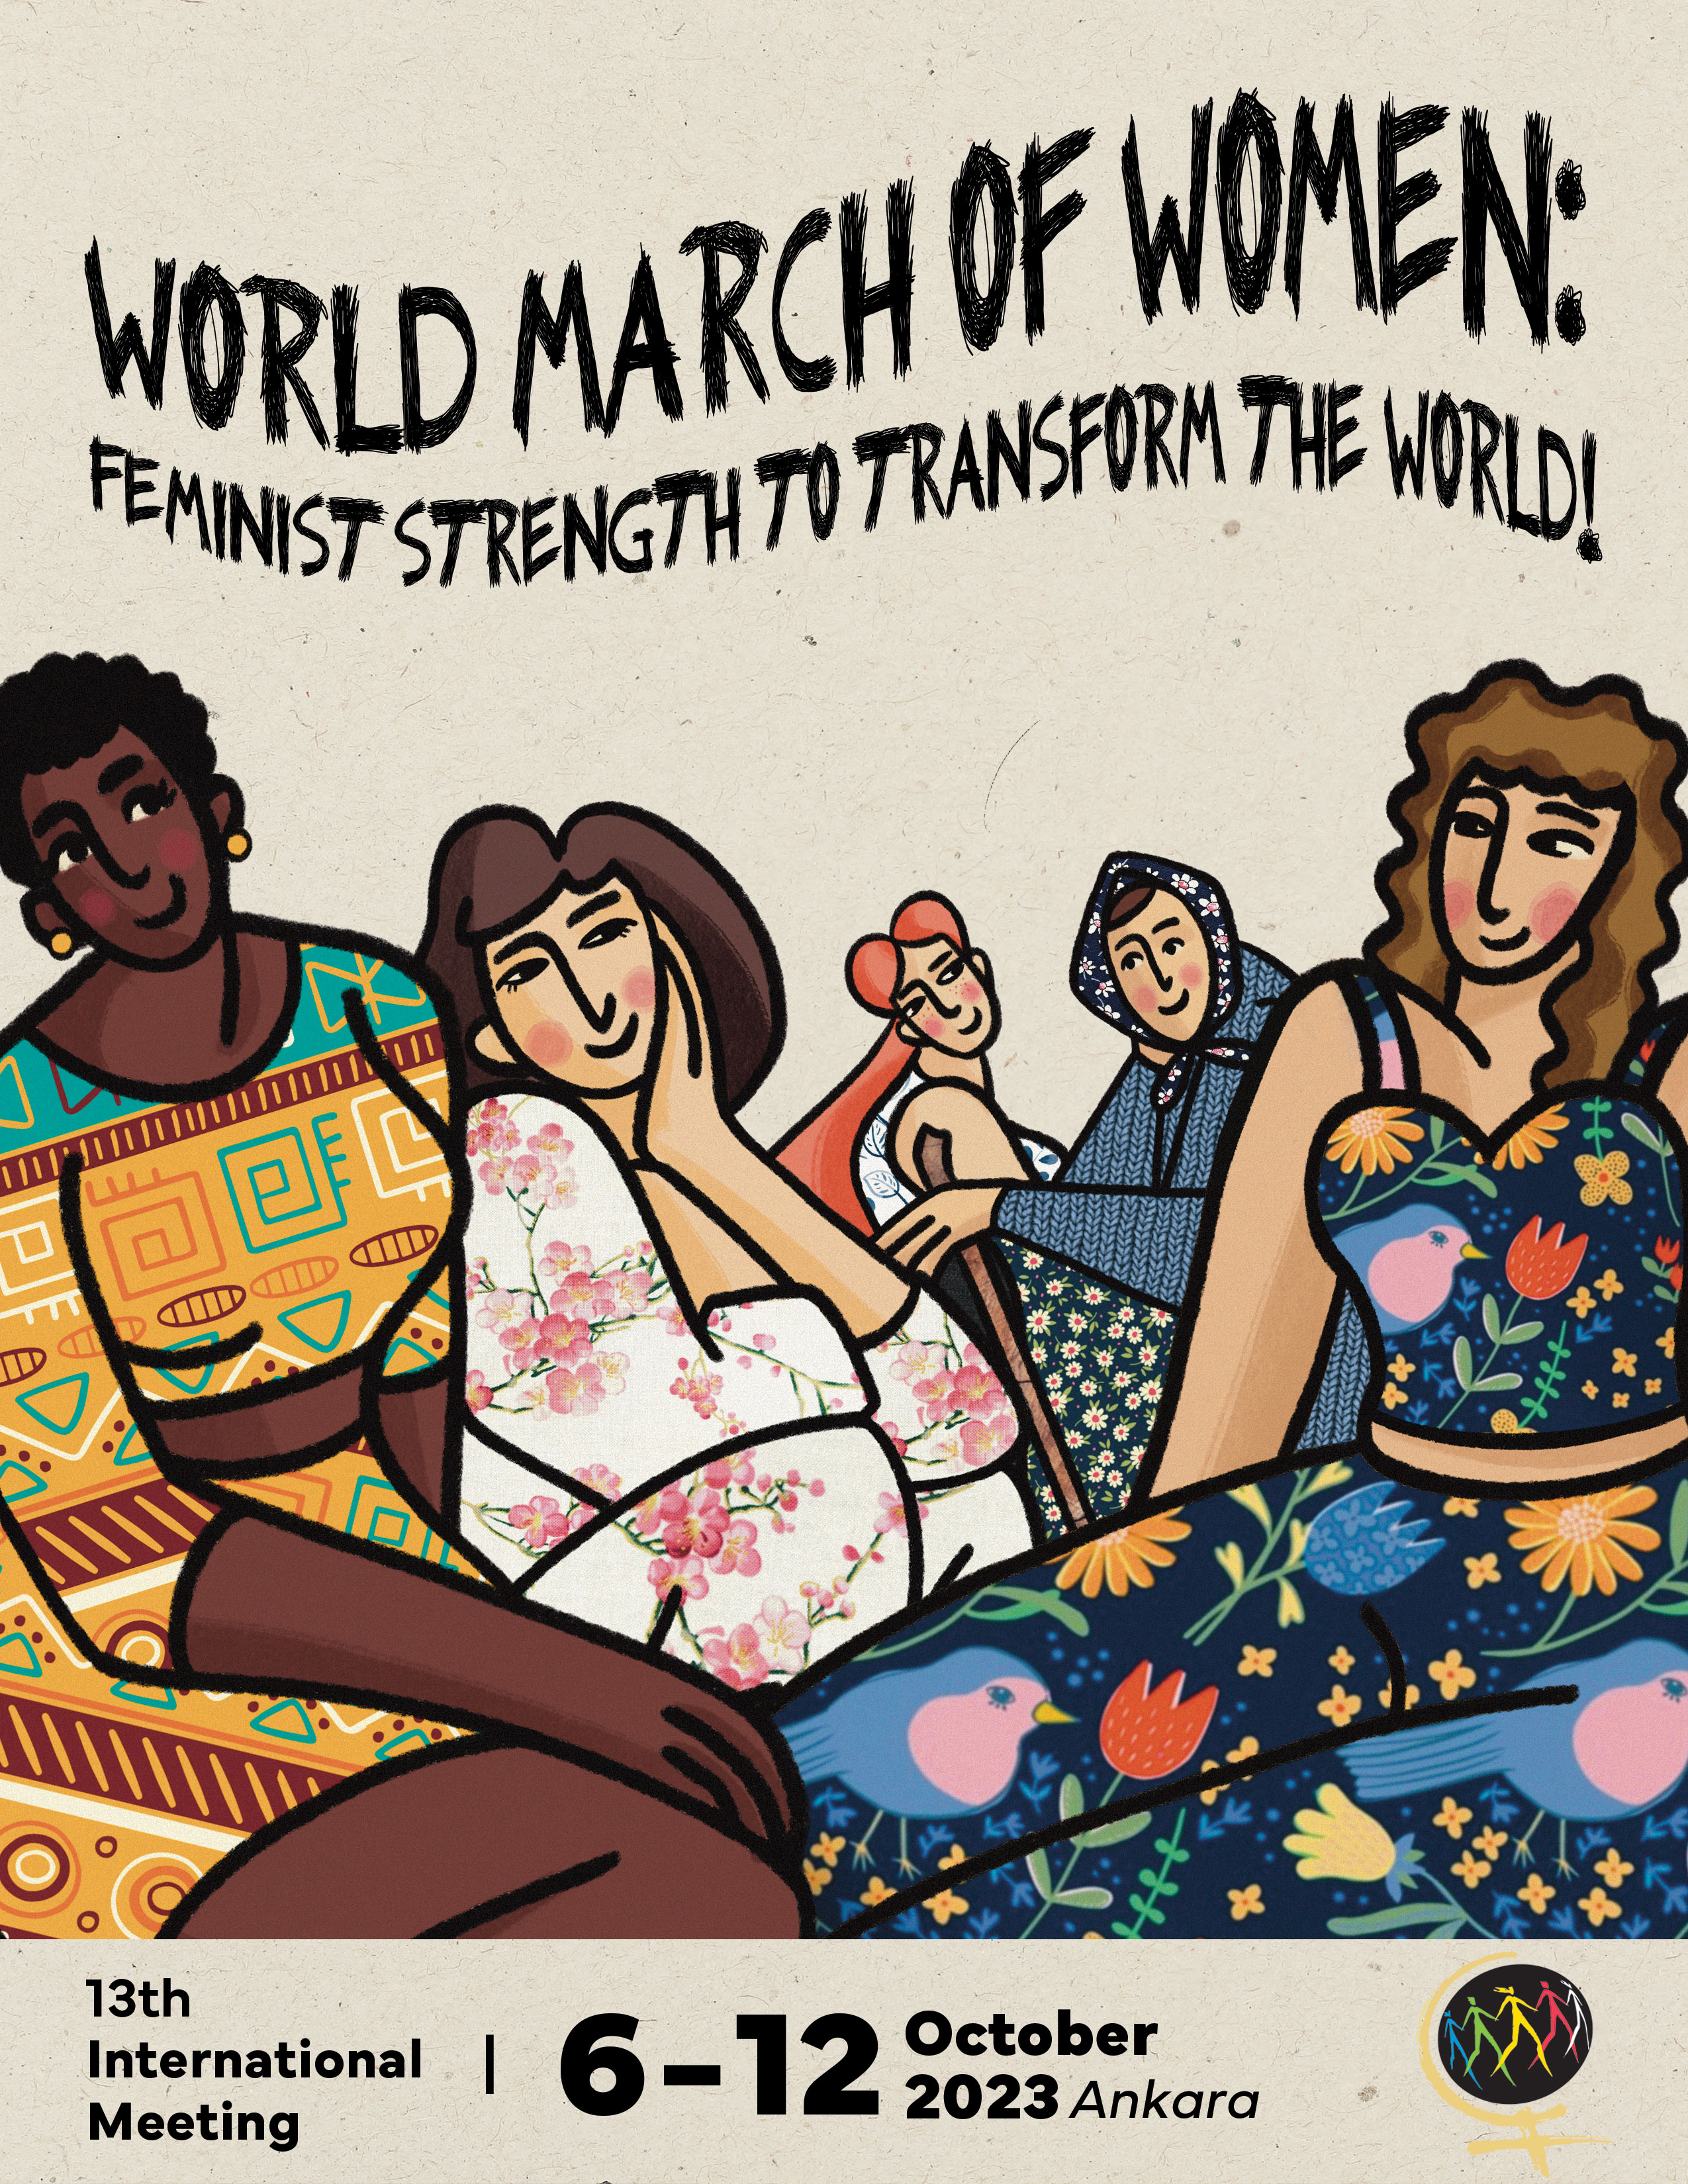 The World March of Women is getting ready for its 13th International Meeting in Ankara, Turkey